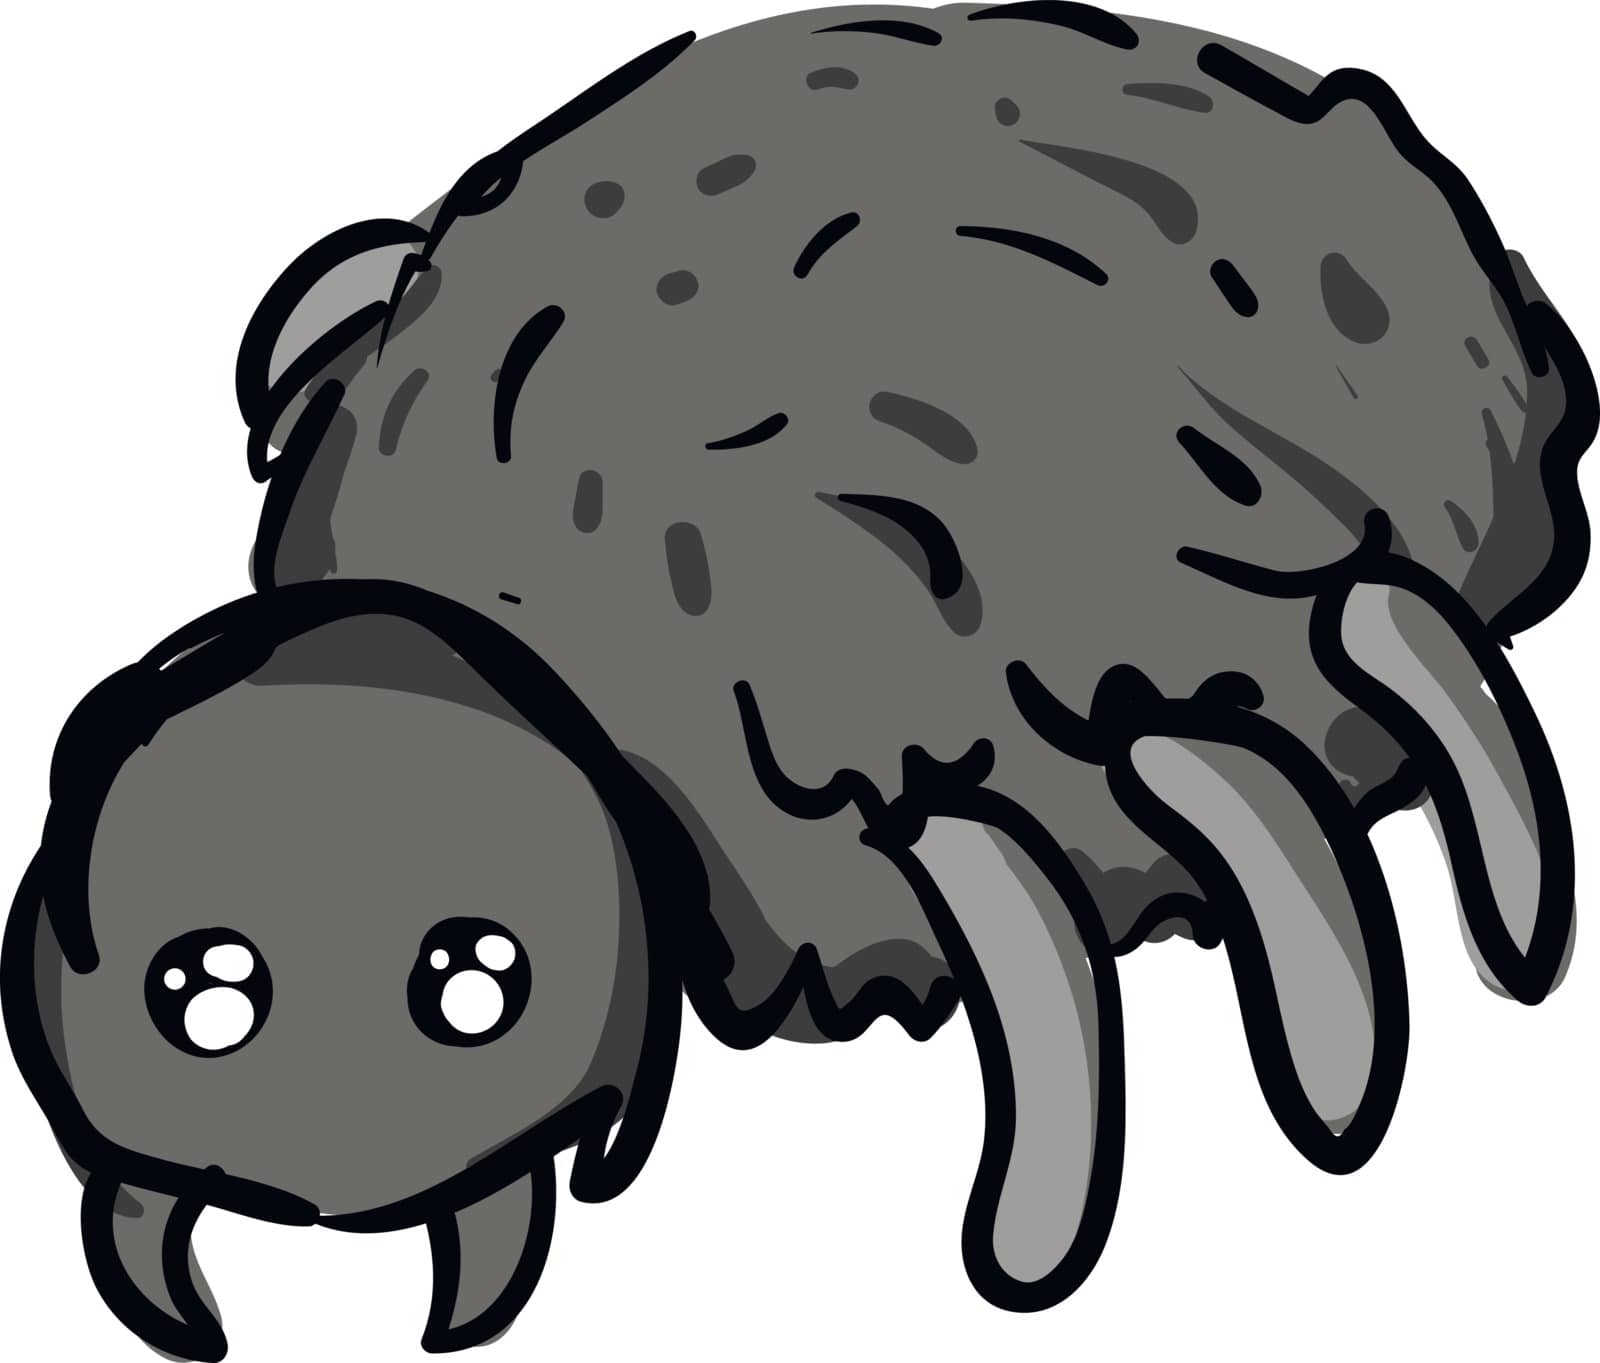 Simple cartoon of a grey spider vector illustration on white bac by Morphart